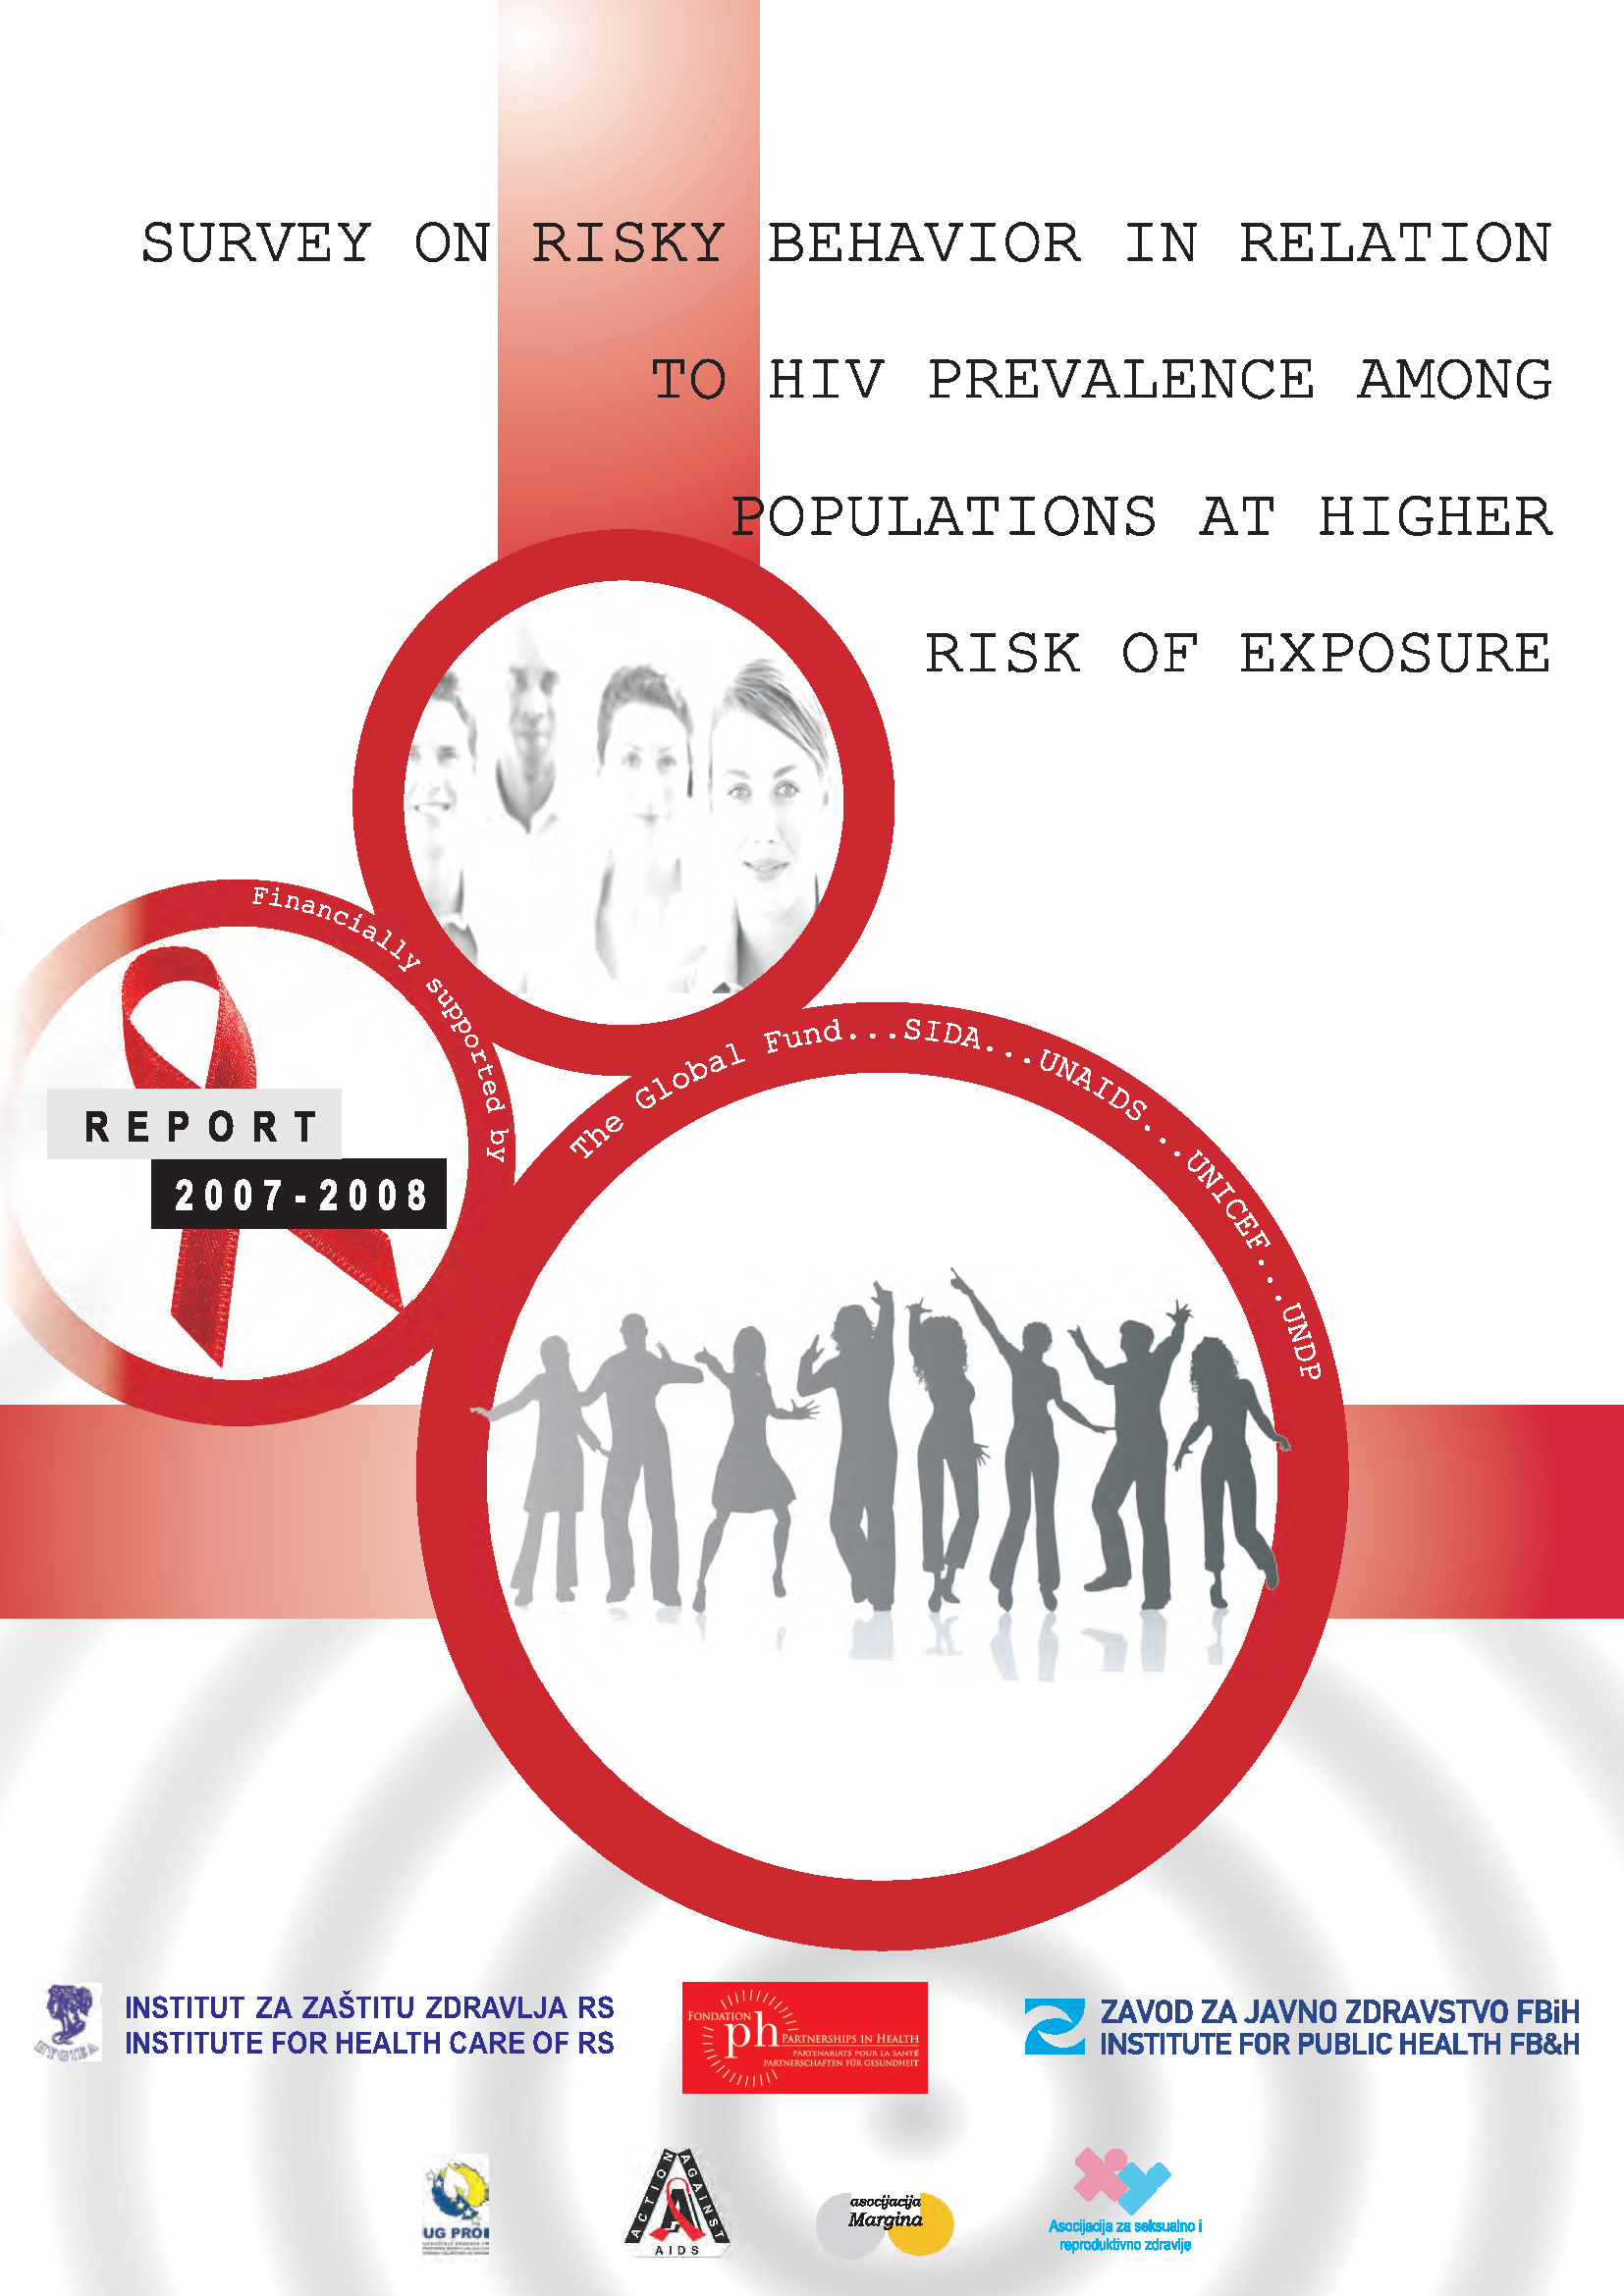 Survey on Risky Behavior in Relation to HIV Prevalence Among Populations at Higher Risk of Exposure, 2008.